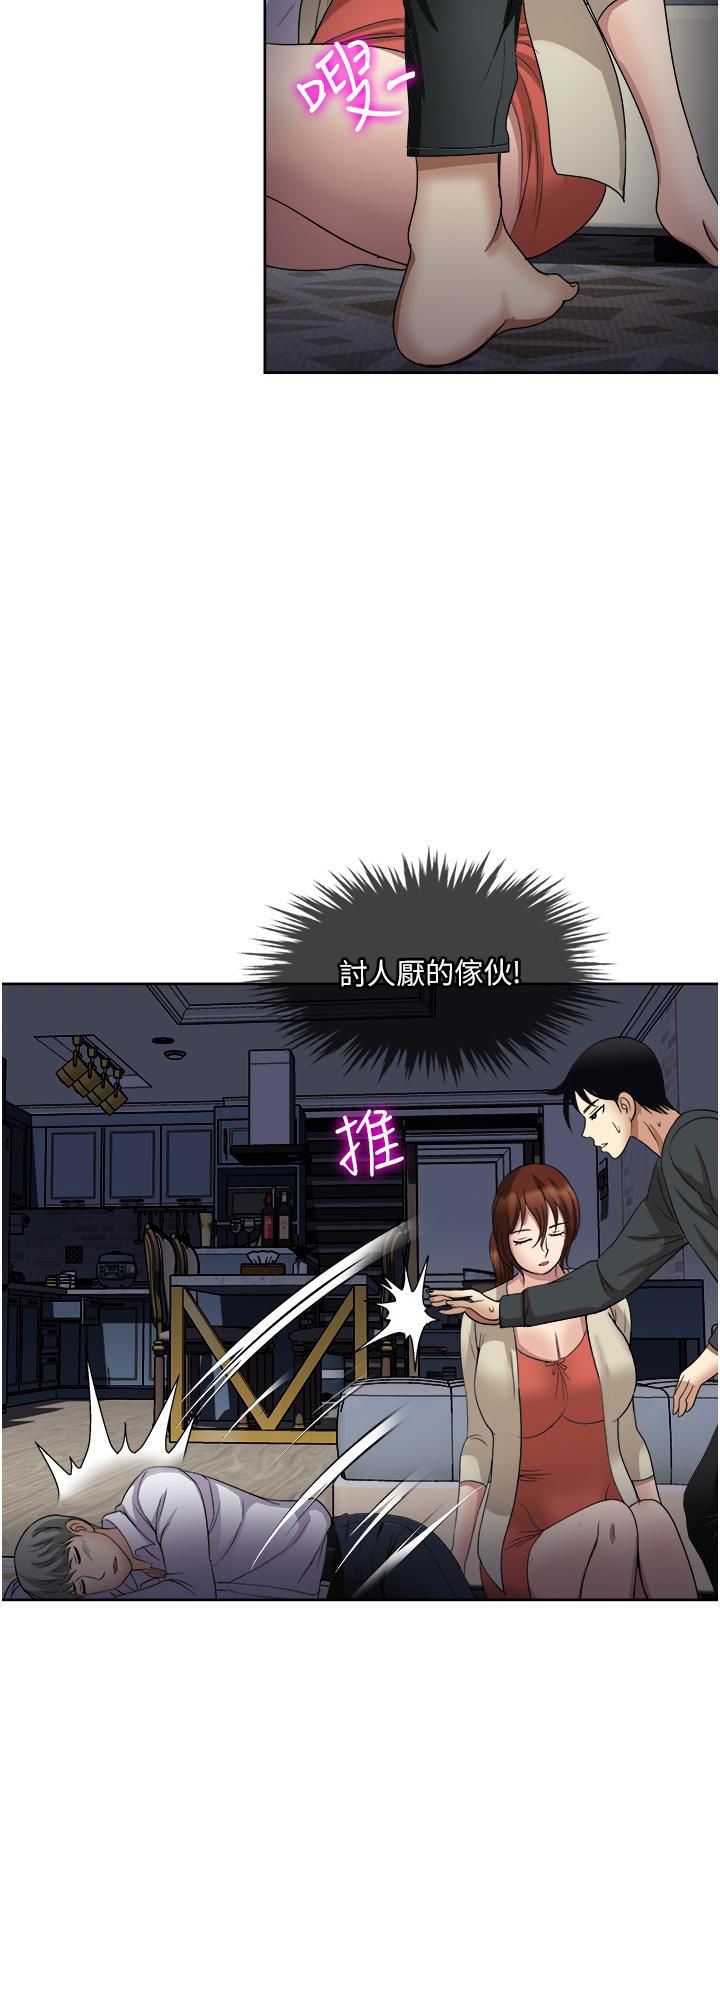 just-once-raw-chap-27-29